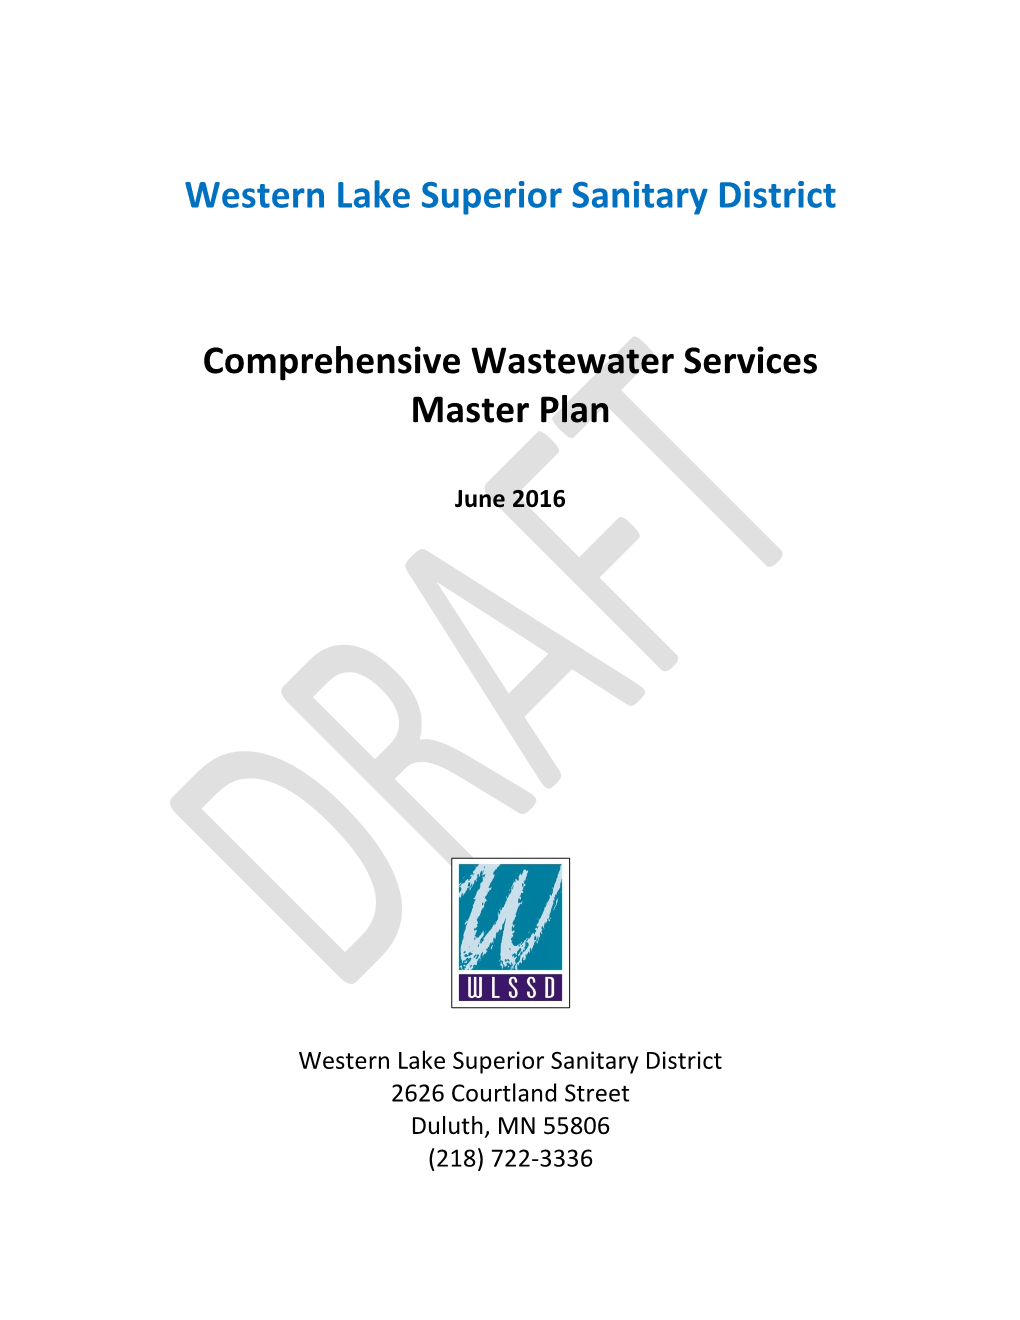 Western Lake Superior Sanitary District Comprehensive Wastewater Services Master Plan June 2016